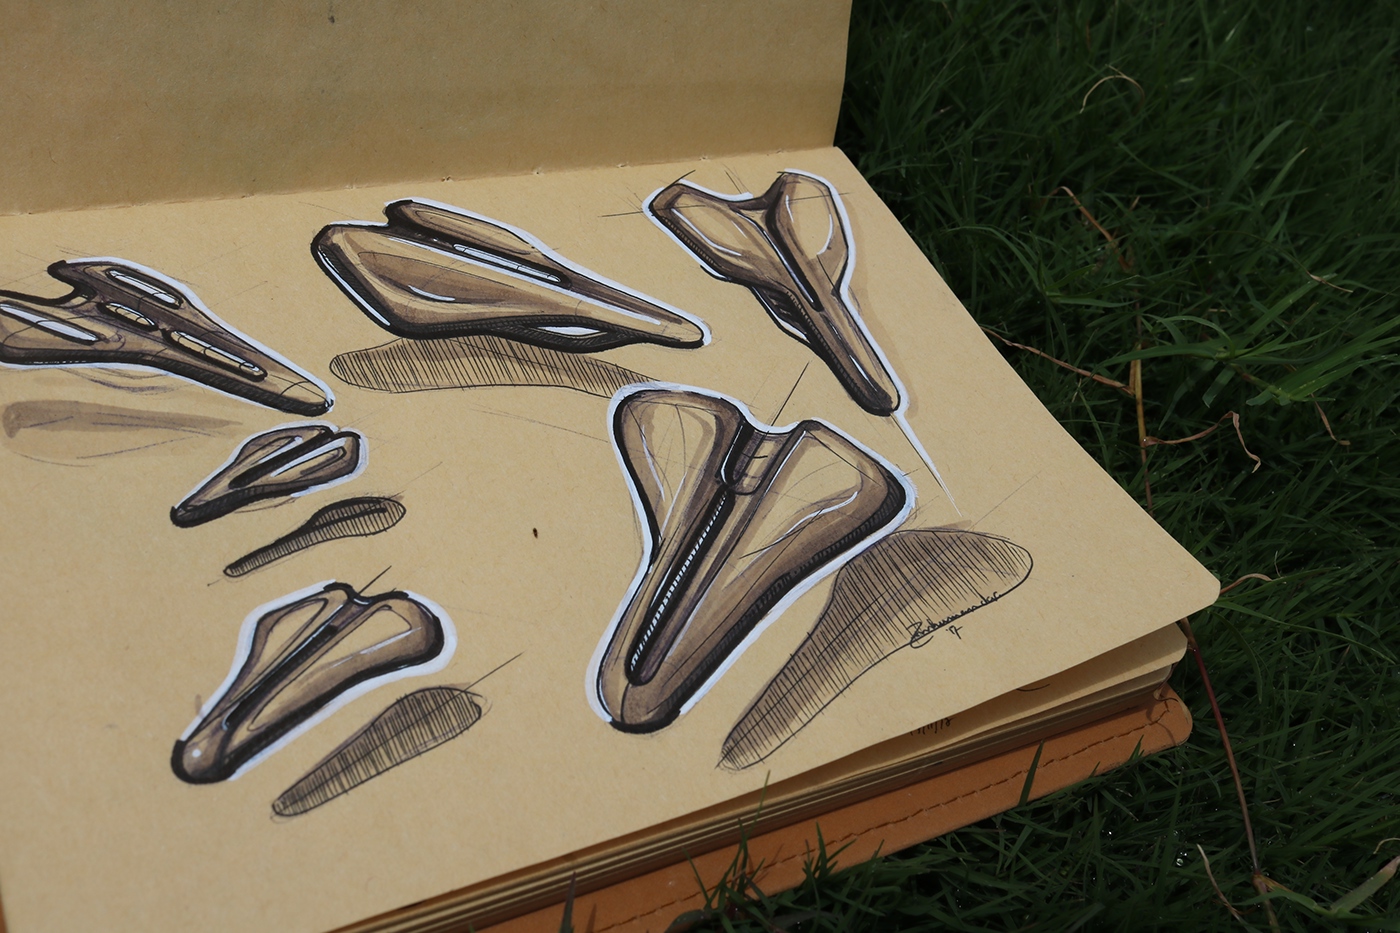 anshuman kumar nid NID national institute of design FLX decathlon shoes sketches illustrations ideations